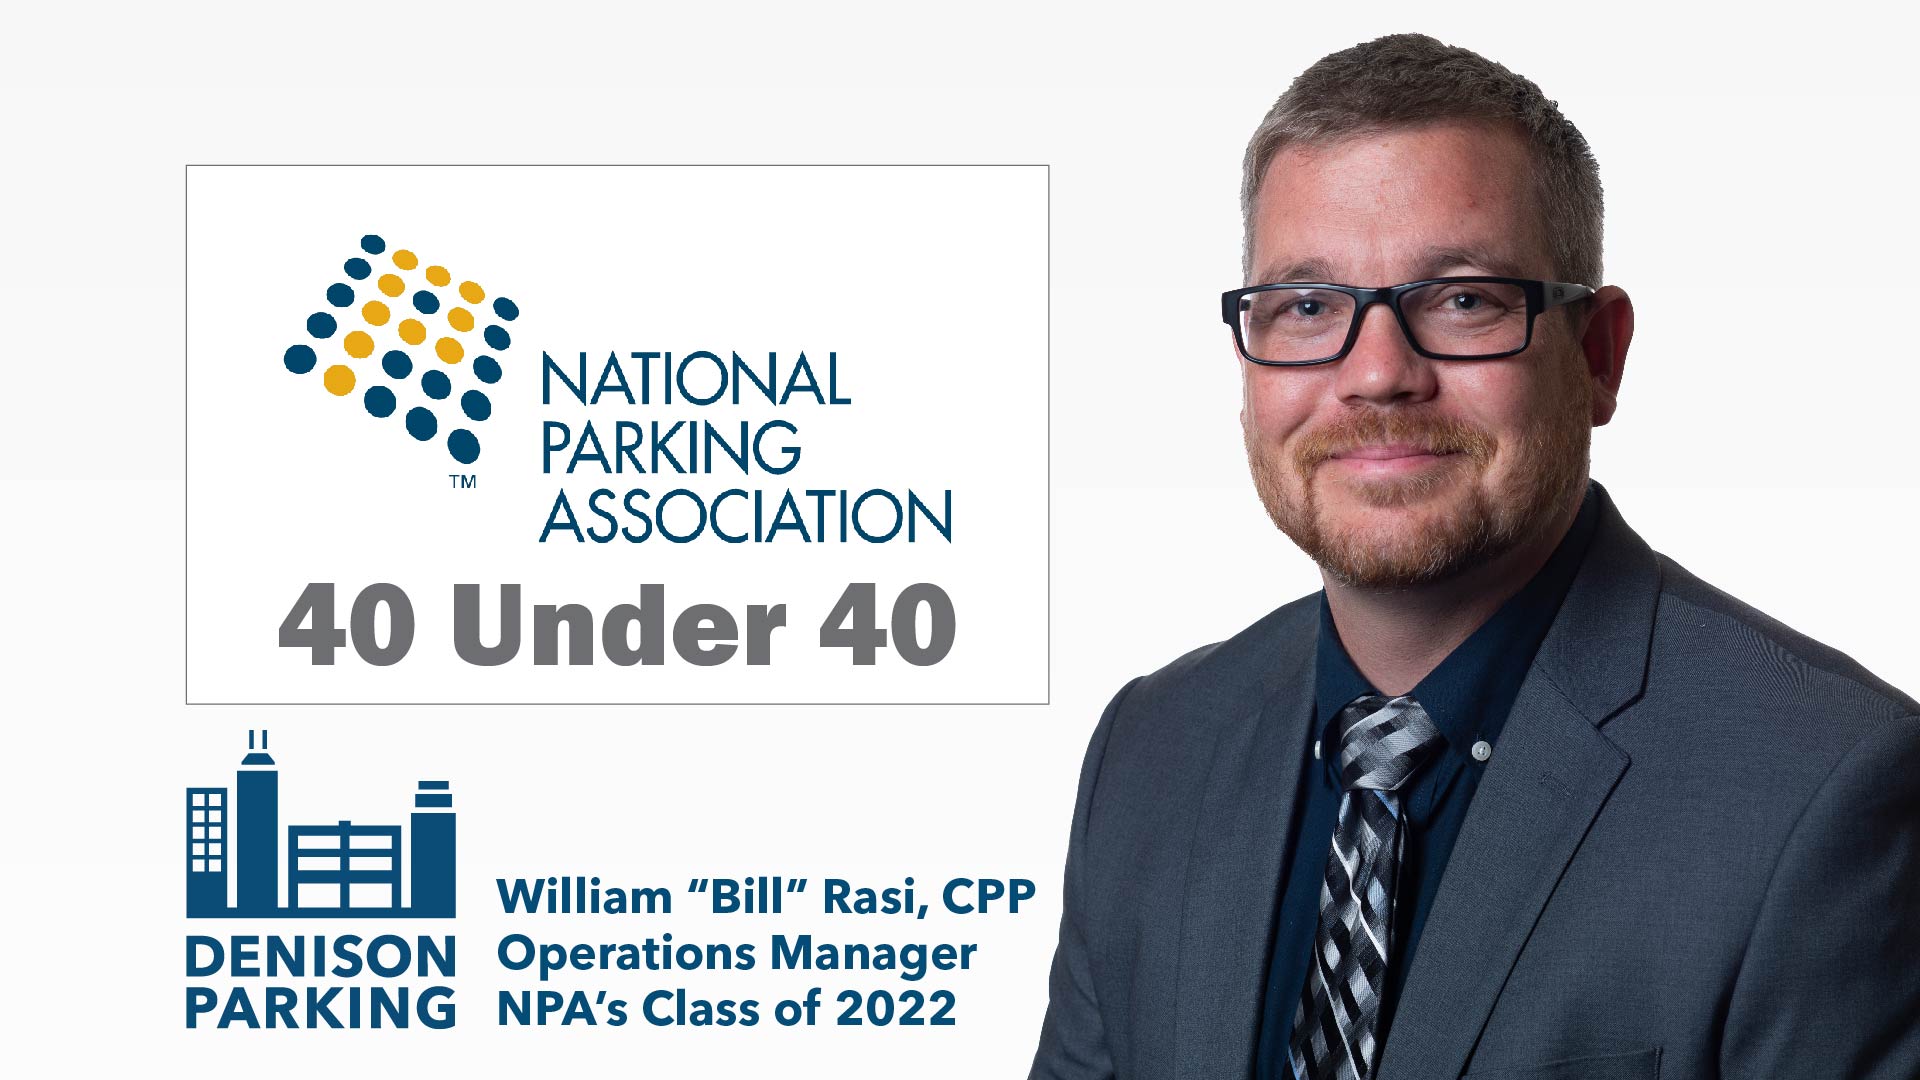 Congratulations to William (Bill) Rasi, now in the Class of 2022 for National Parking Association’s 40 Under 40